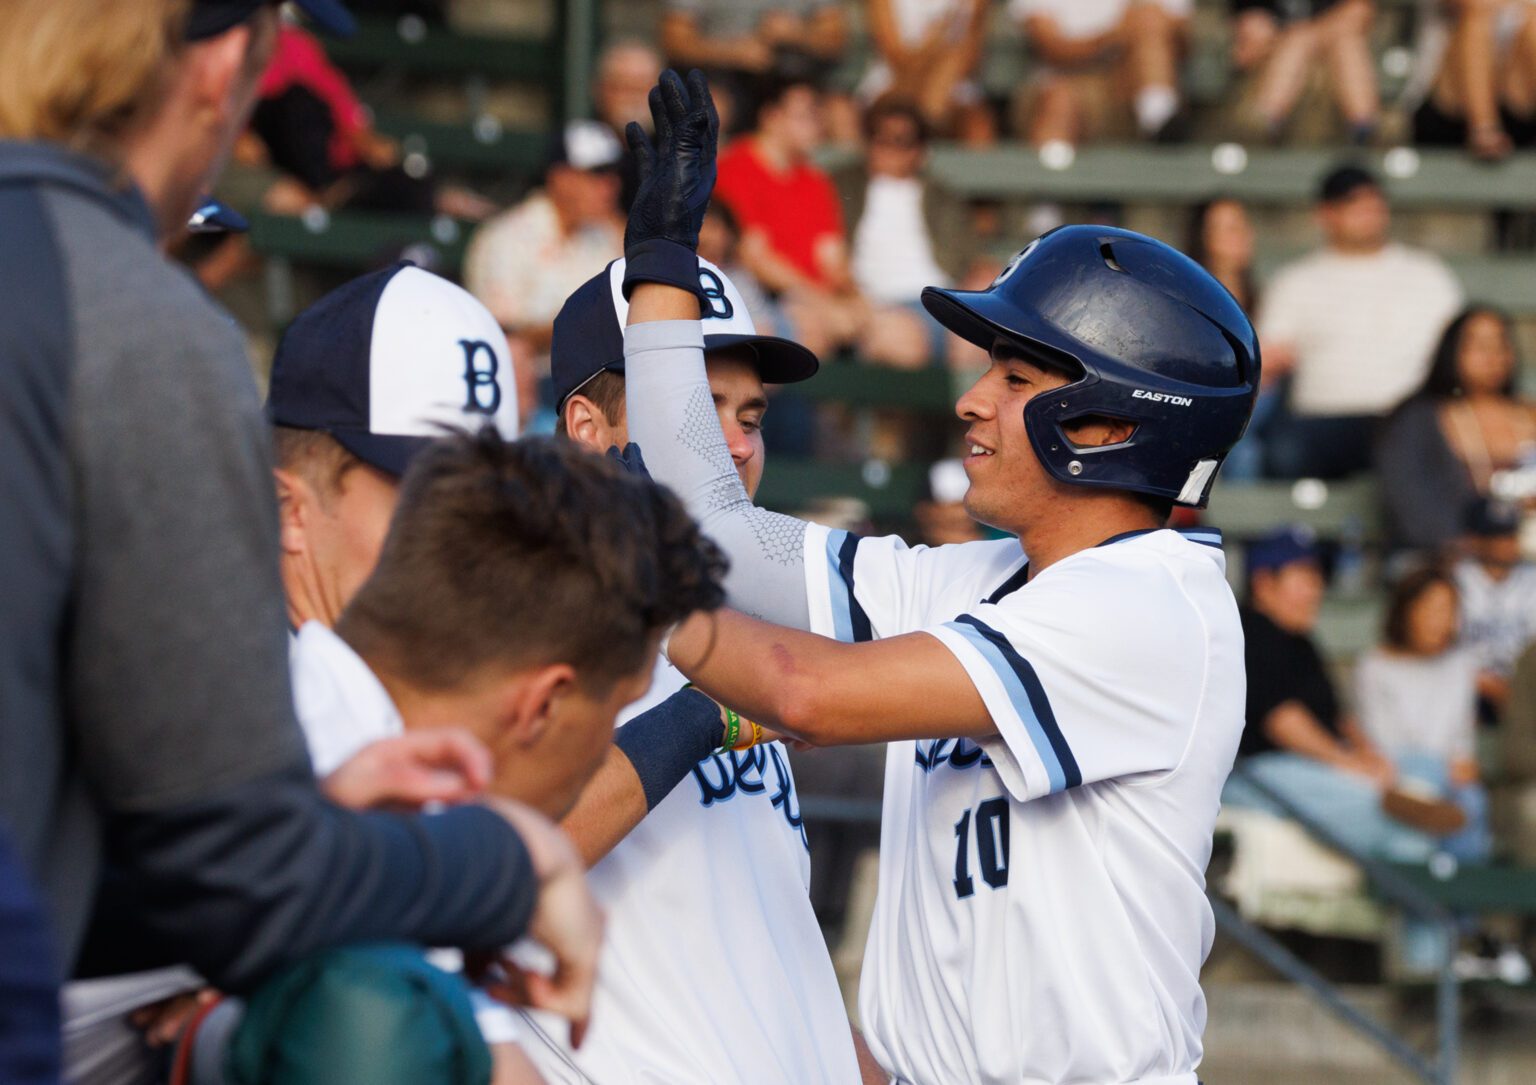 Christopher Campos high-fives teammates after scoring on a walk as the Bellingham Bells tie up the game 1-1 Thursday